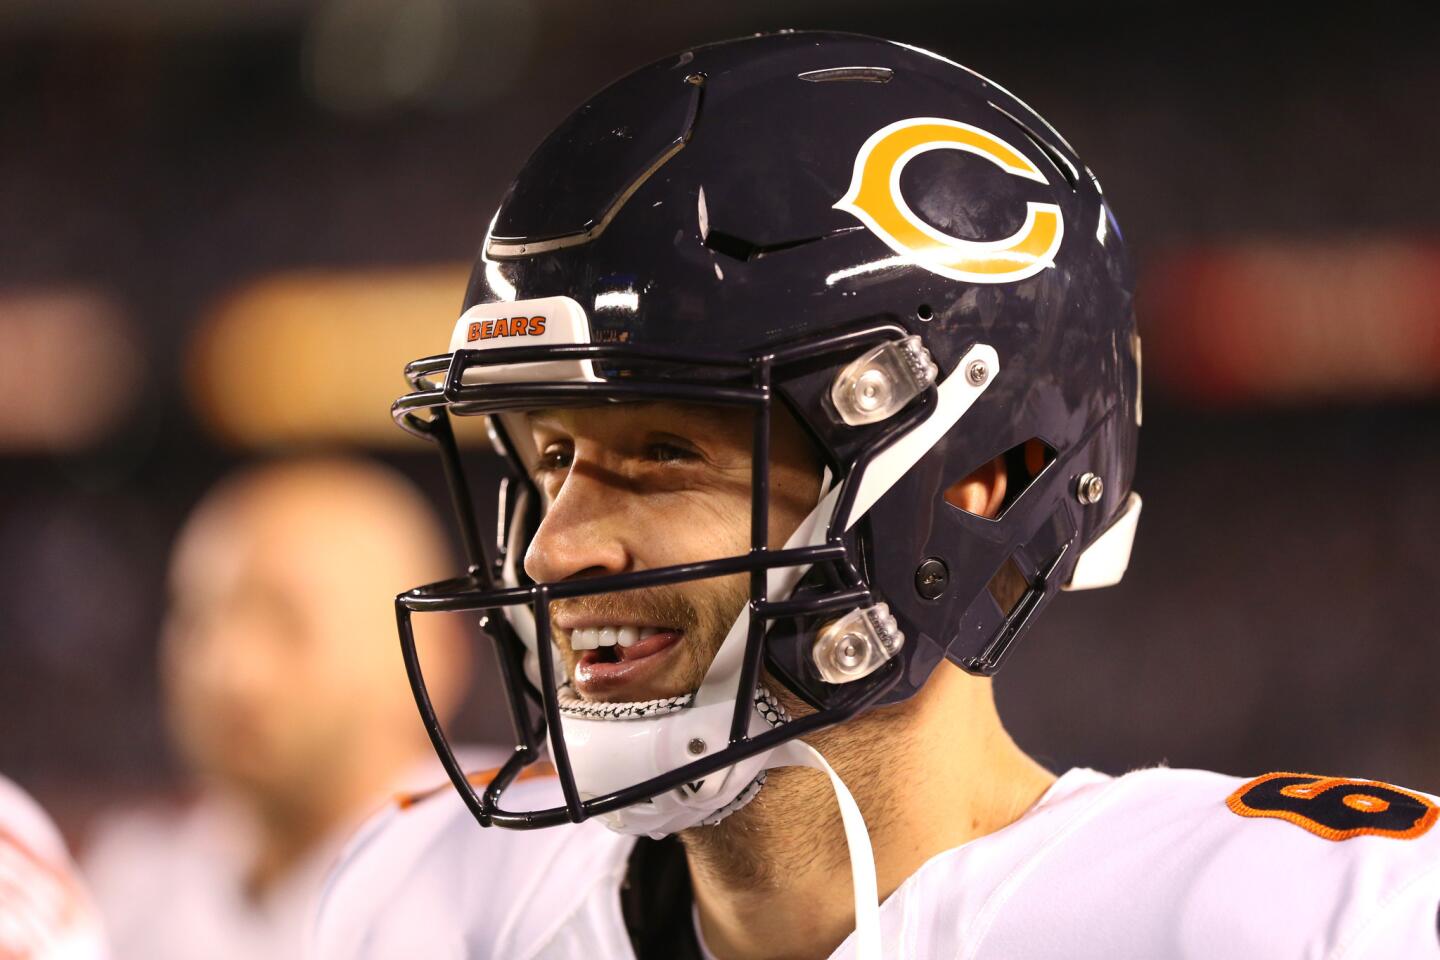 Bears quarterback Jay Cutler has a smile on his face during the game against the Chargers at Qualcomm Stadium.